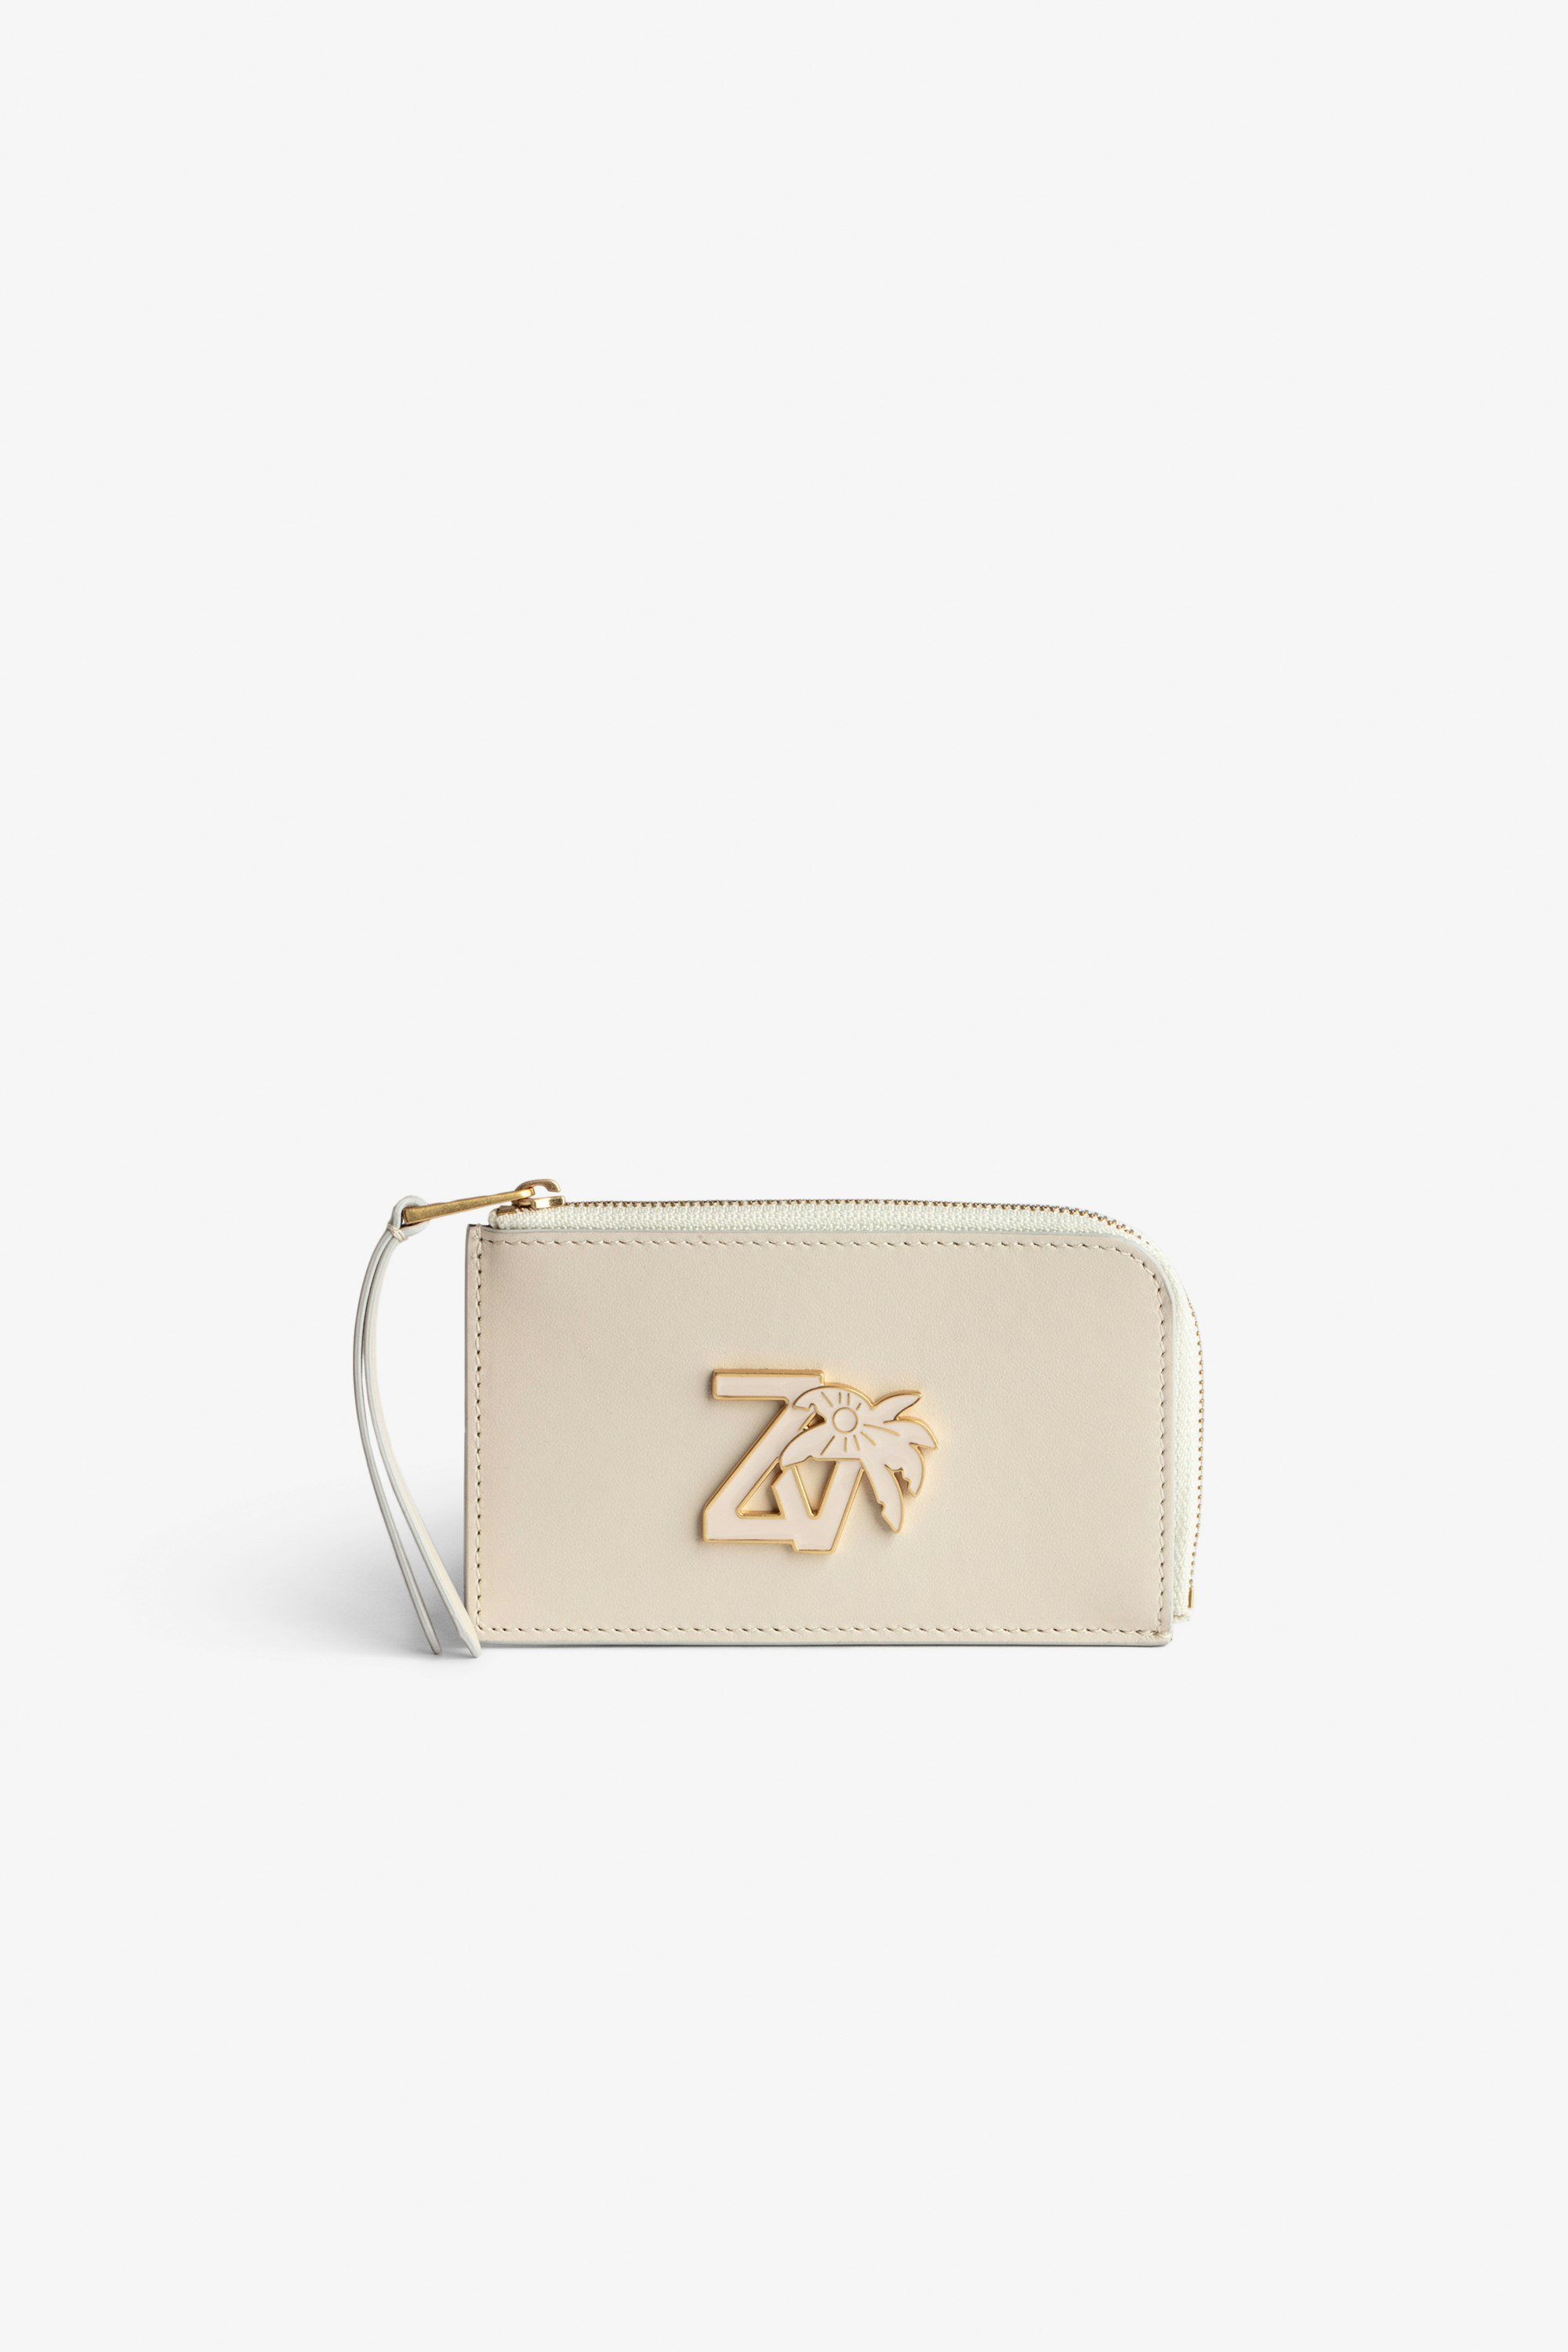 ZV Initiale Le Medium Card Case Women's off-white leather card case with ZV Palm Tree clasp